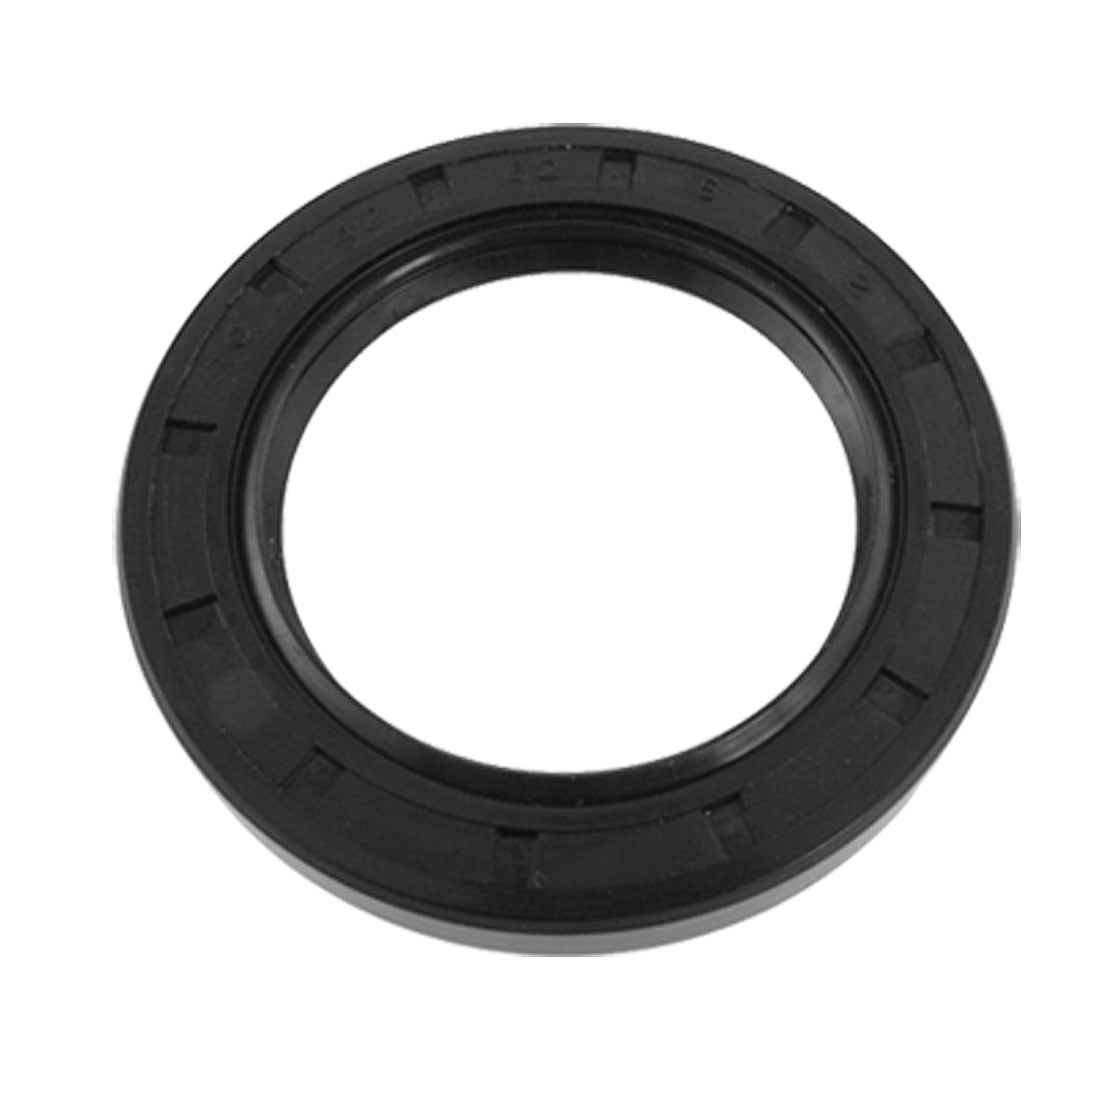 NEW TC 20X28X6 DOUBLE LIPS METRIC OIL DUST SEAL WITH GARTER SPRING 